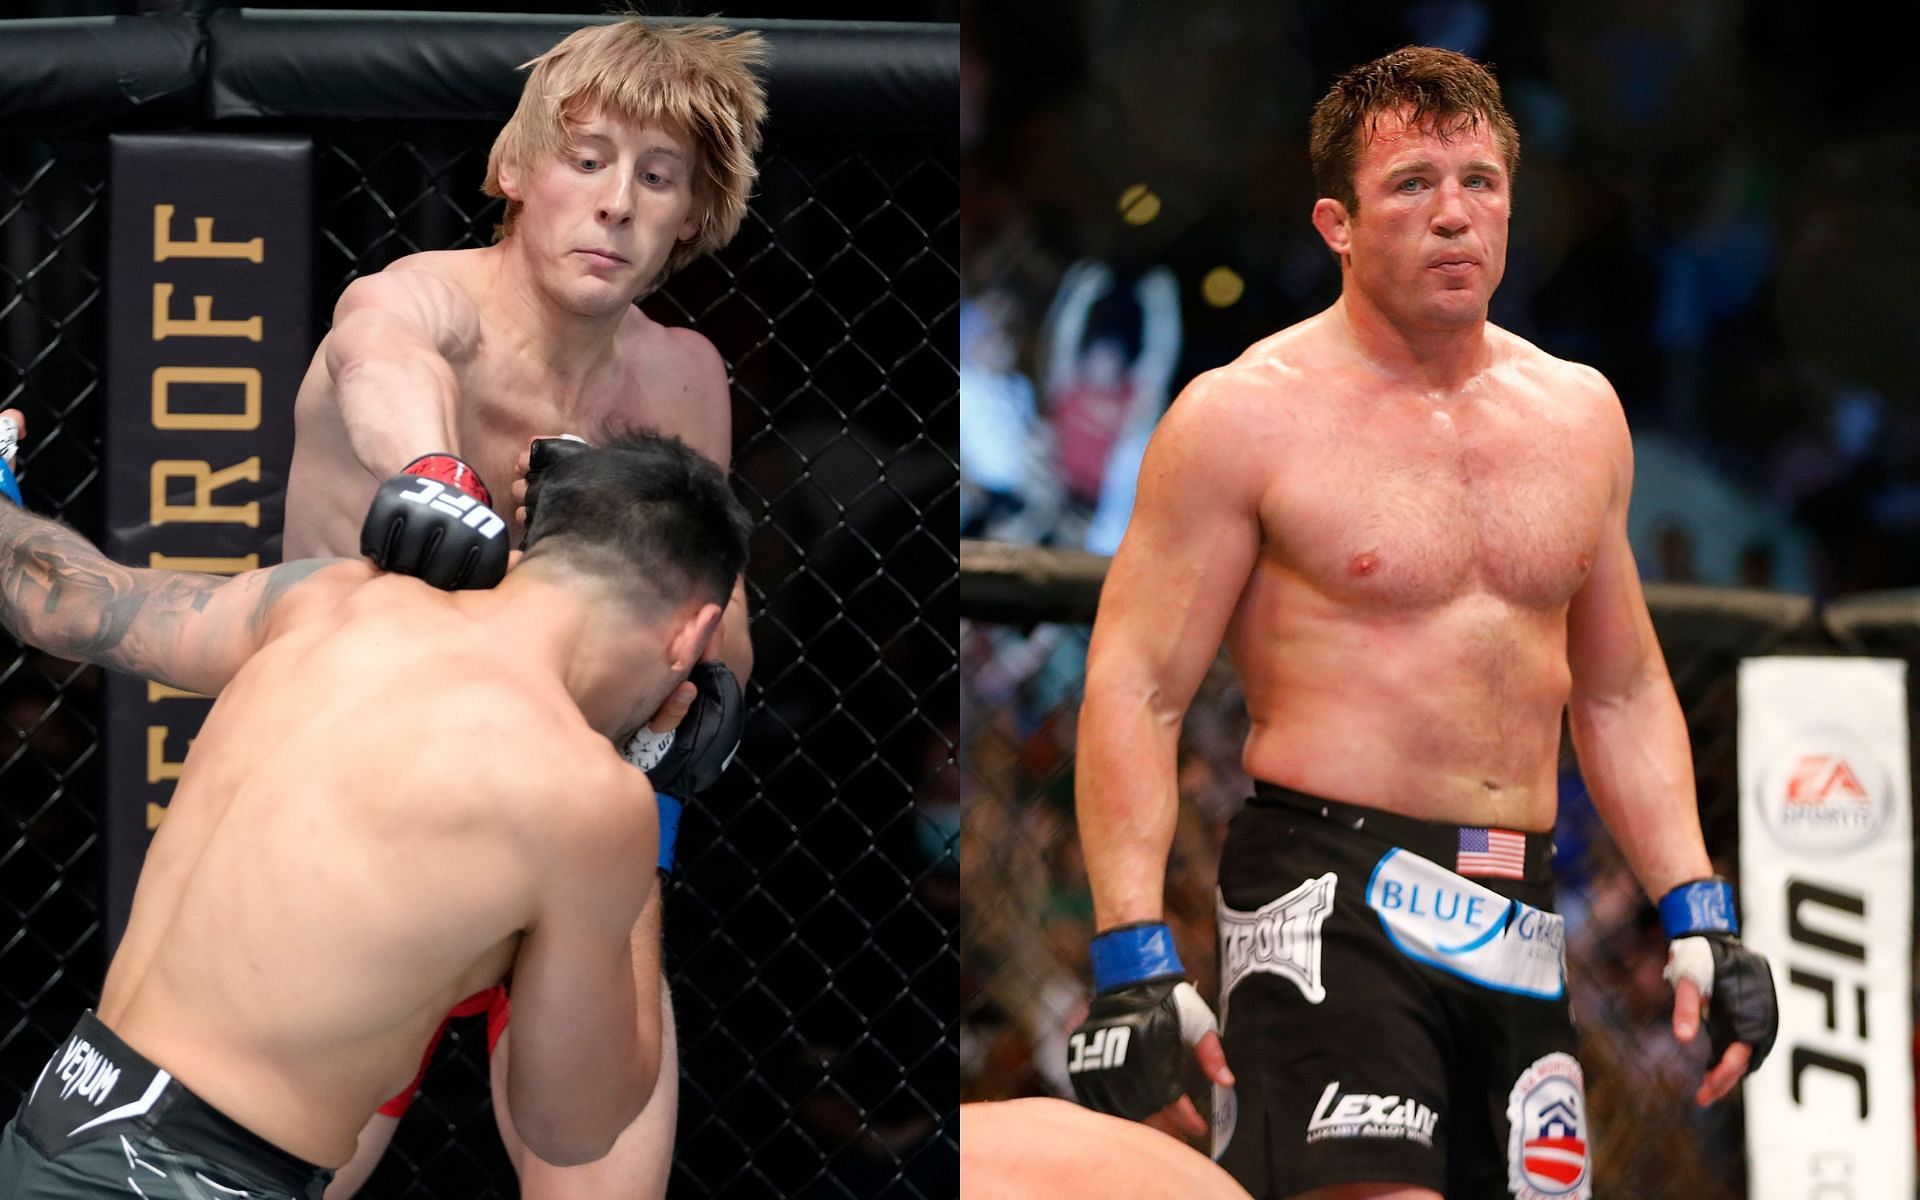 Current and retired UFC fighters Paddy Pimblett (left) and Chael Sonnen (right), respectively